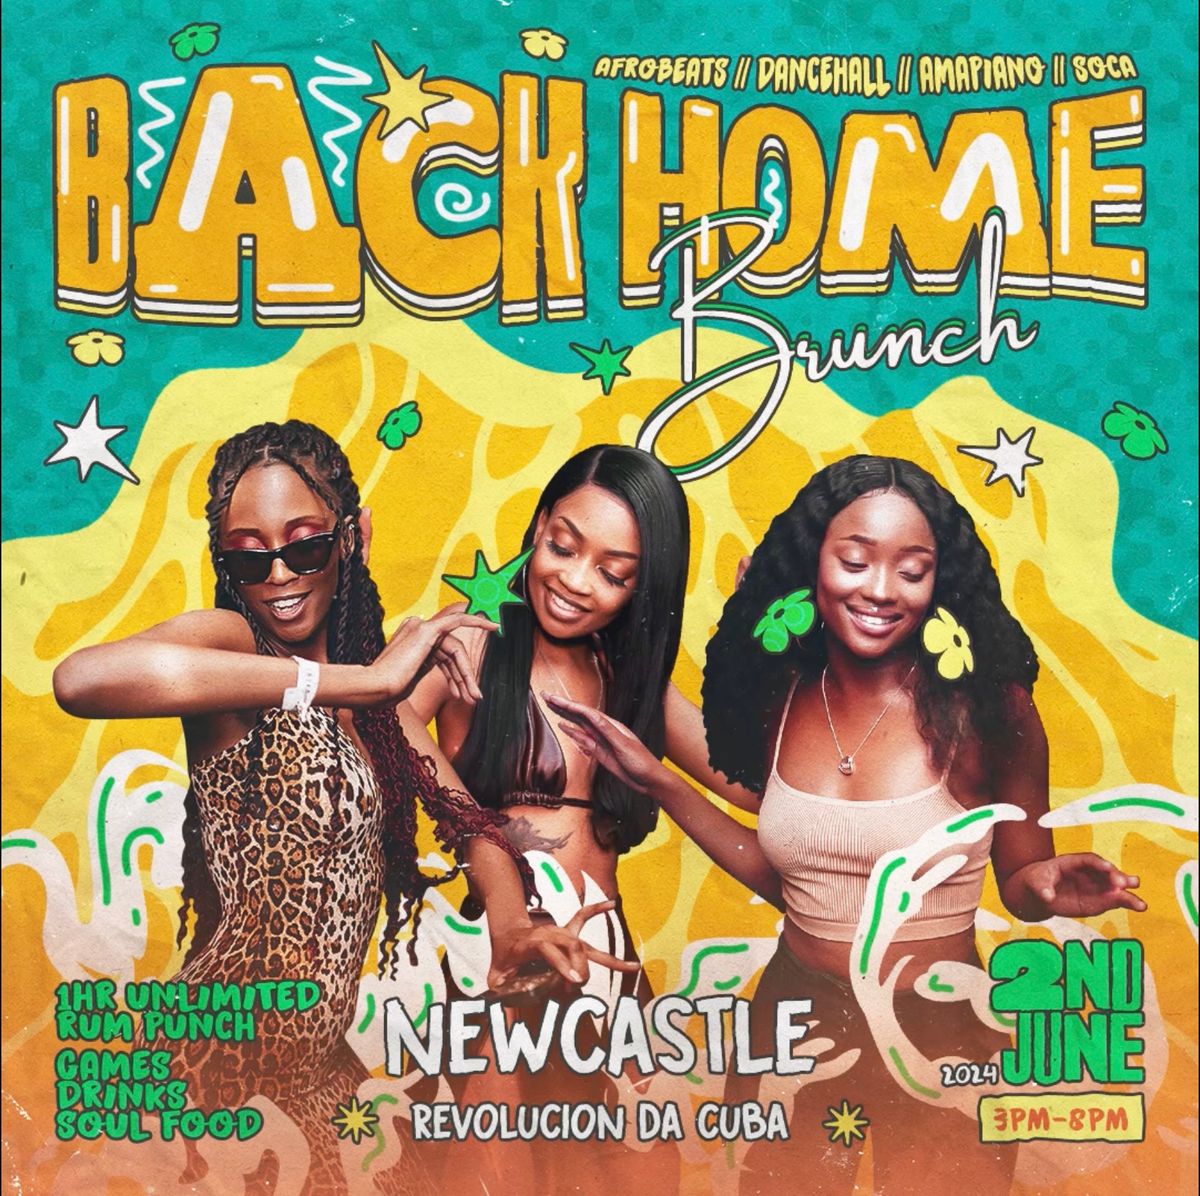 BACK HOME BRUNCH: ROOFTOP DAY PARTY NEWCASTLE 